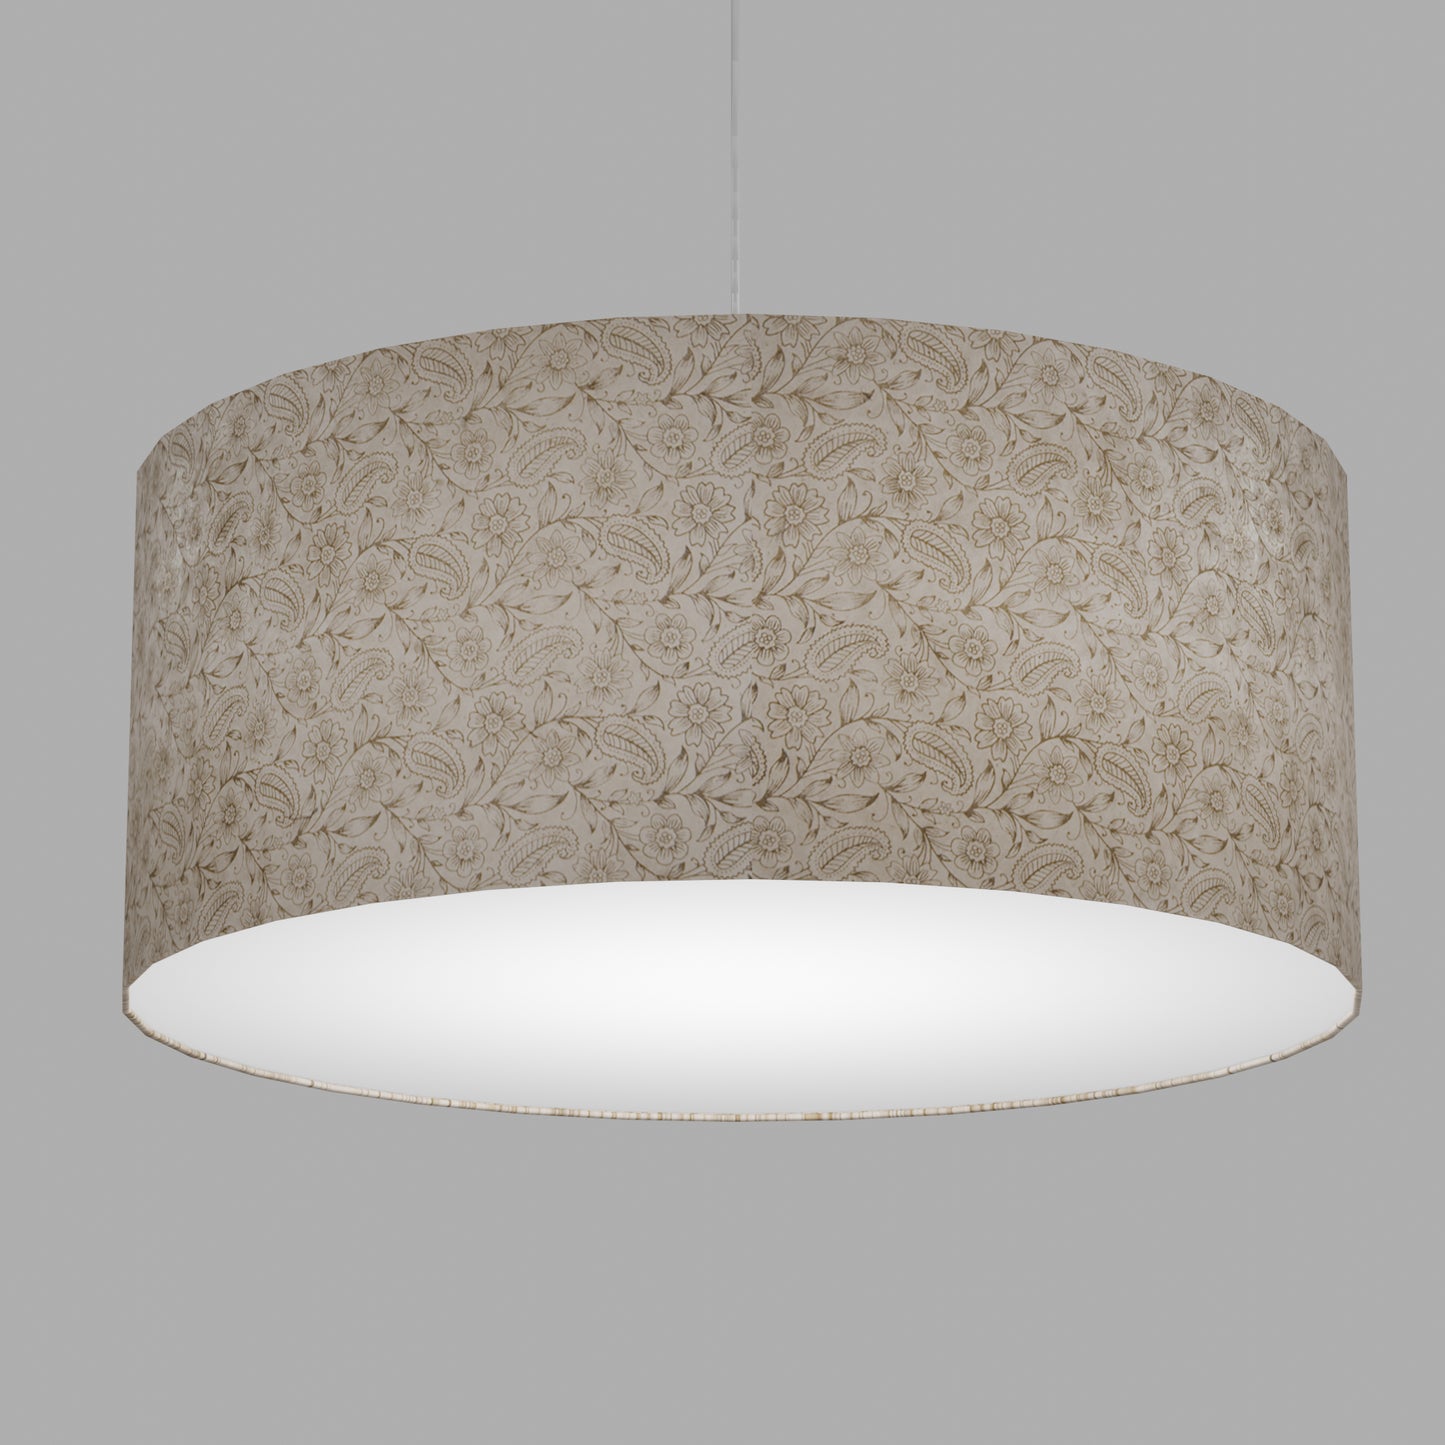 Drum Lamp Shade - P69 - Garden Gold on Natural, 70cm(d) x 30cm(h)